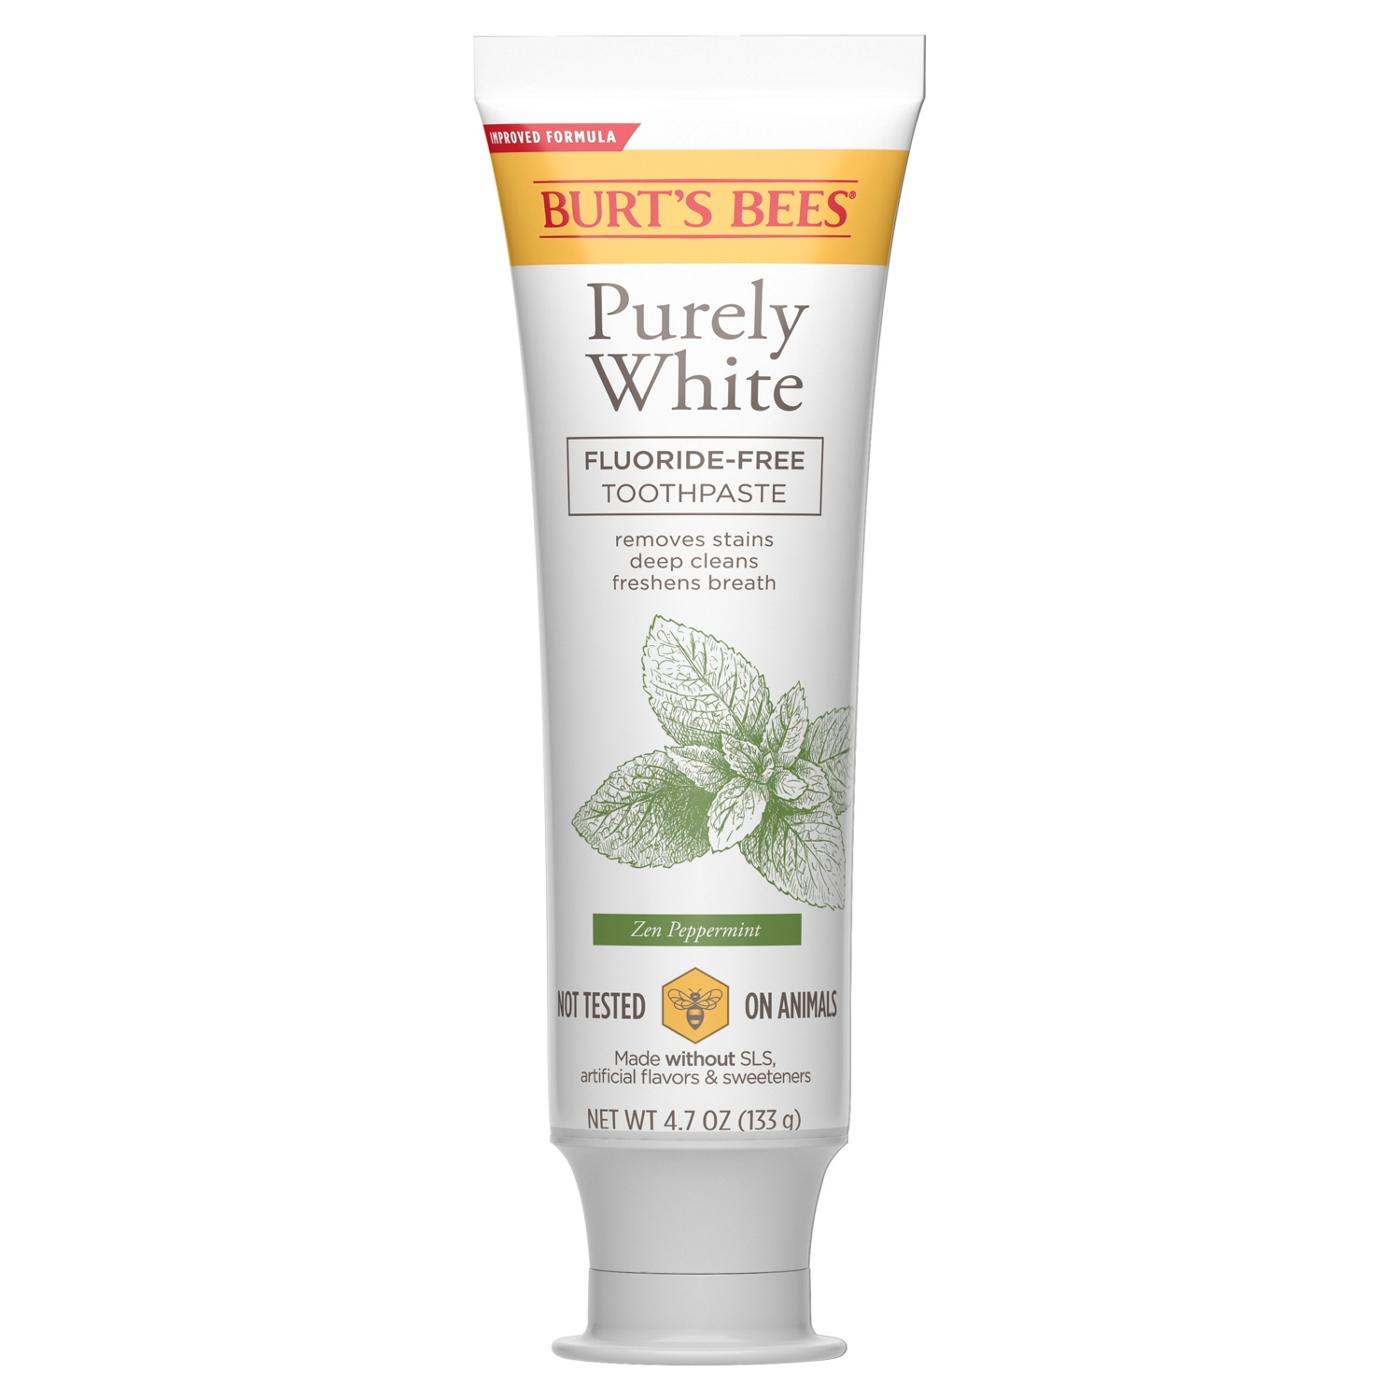 Burt's Bees Purely White Fluoride-Free Toothpaste - Zen Peppermint; image 2 of 8